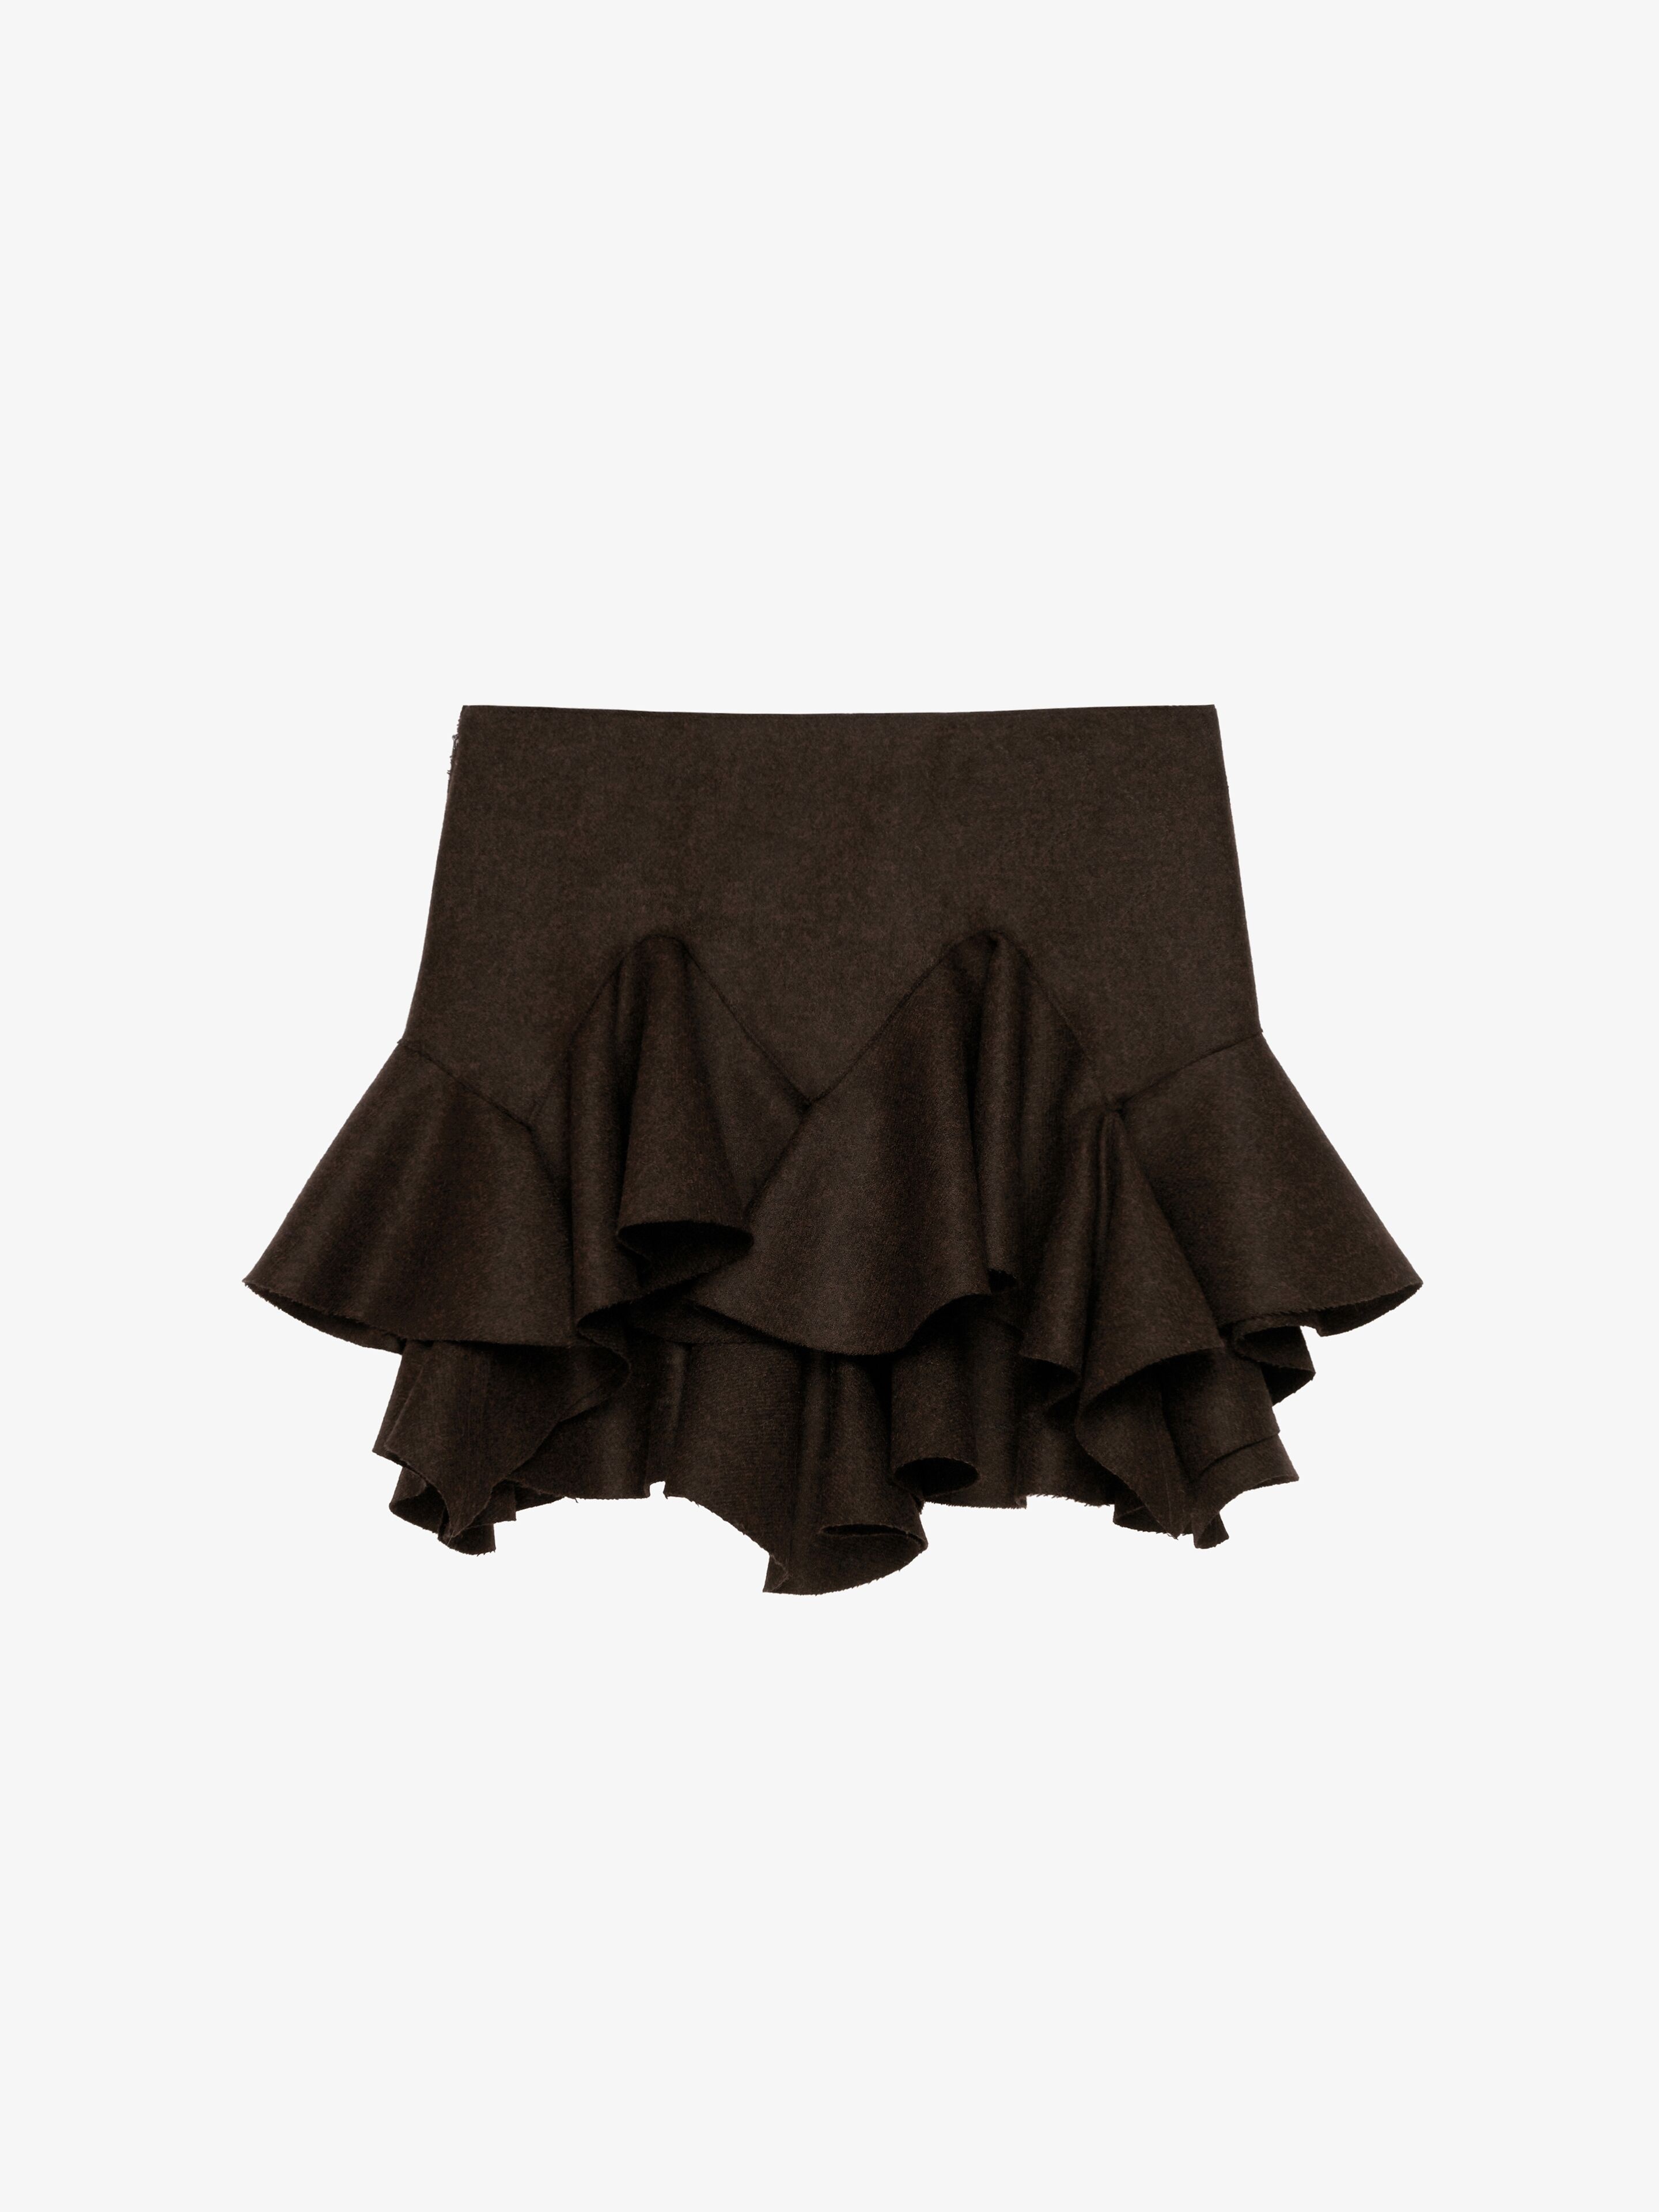 MINI-SKIRT IN FELTED WOOL WITH FLOUNCES - 5